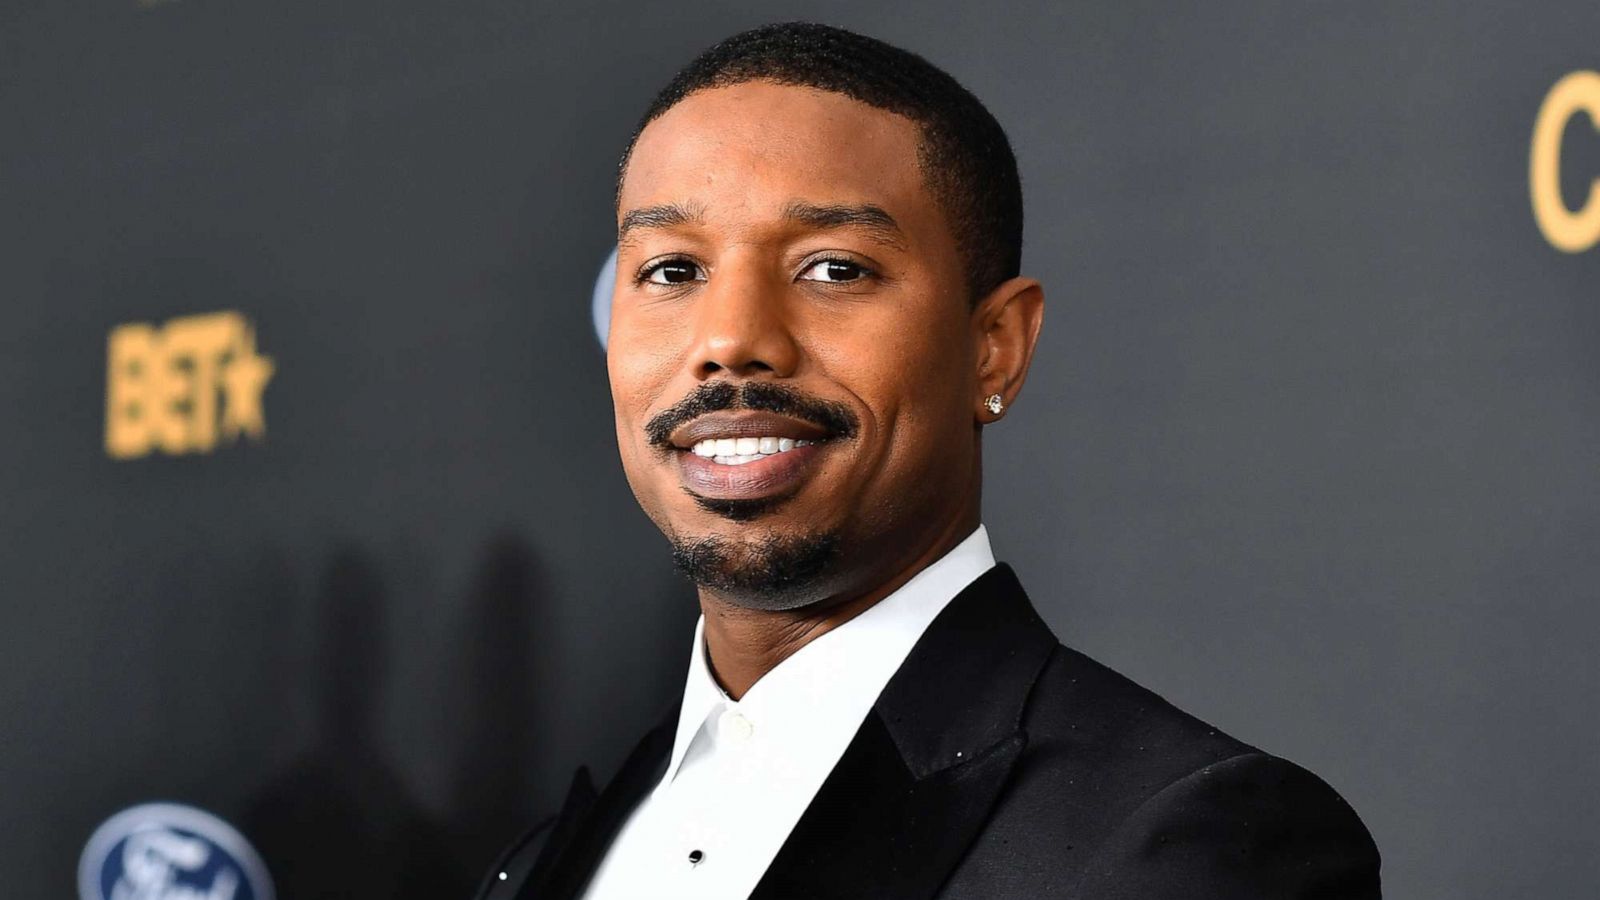 PHOTO: Michael B. Jordan attends the 51st NAACP Image Awards, Presented by BET, on Feb. 22, 2020, in Pasadena, Calif.